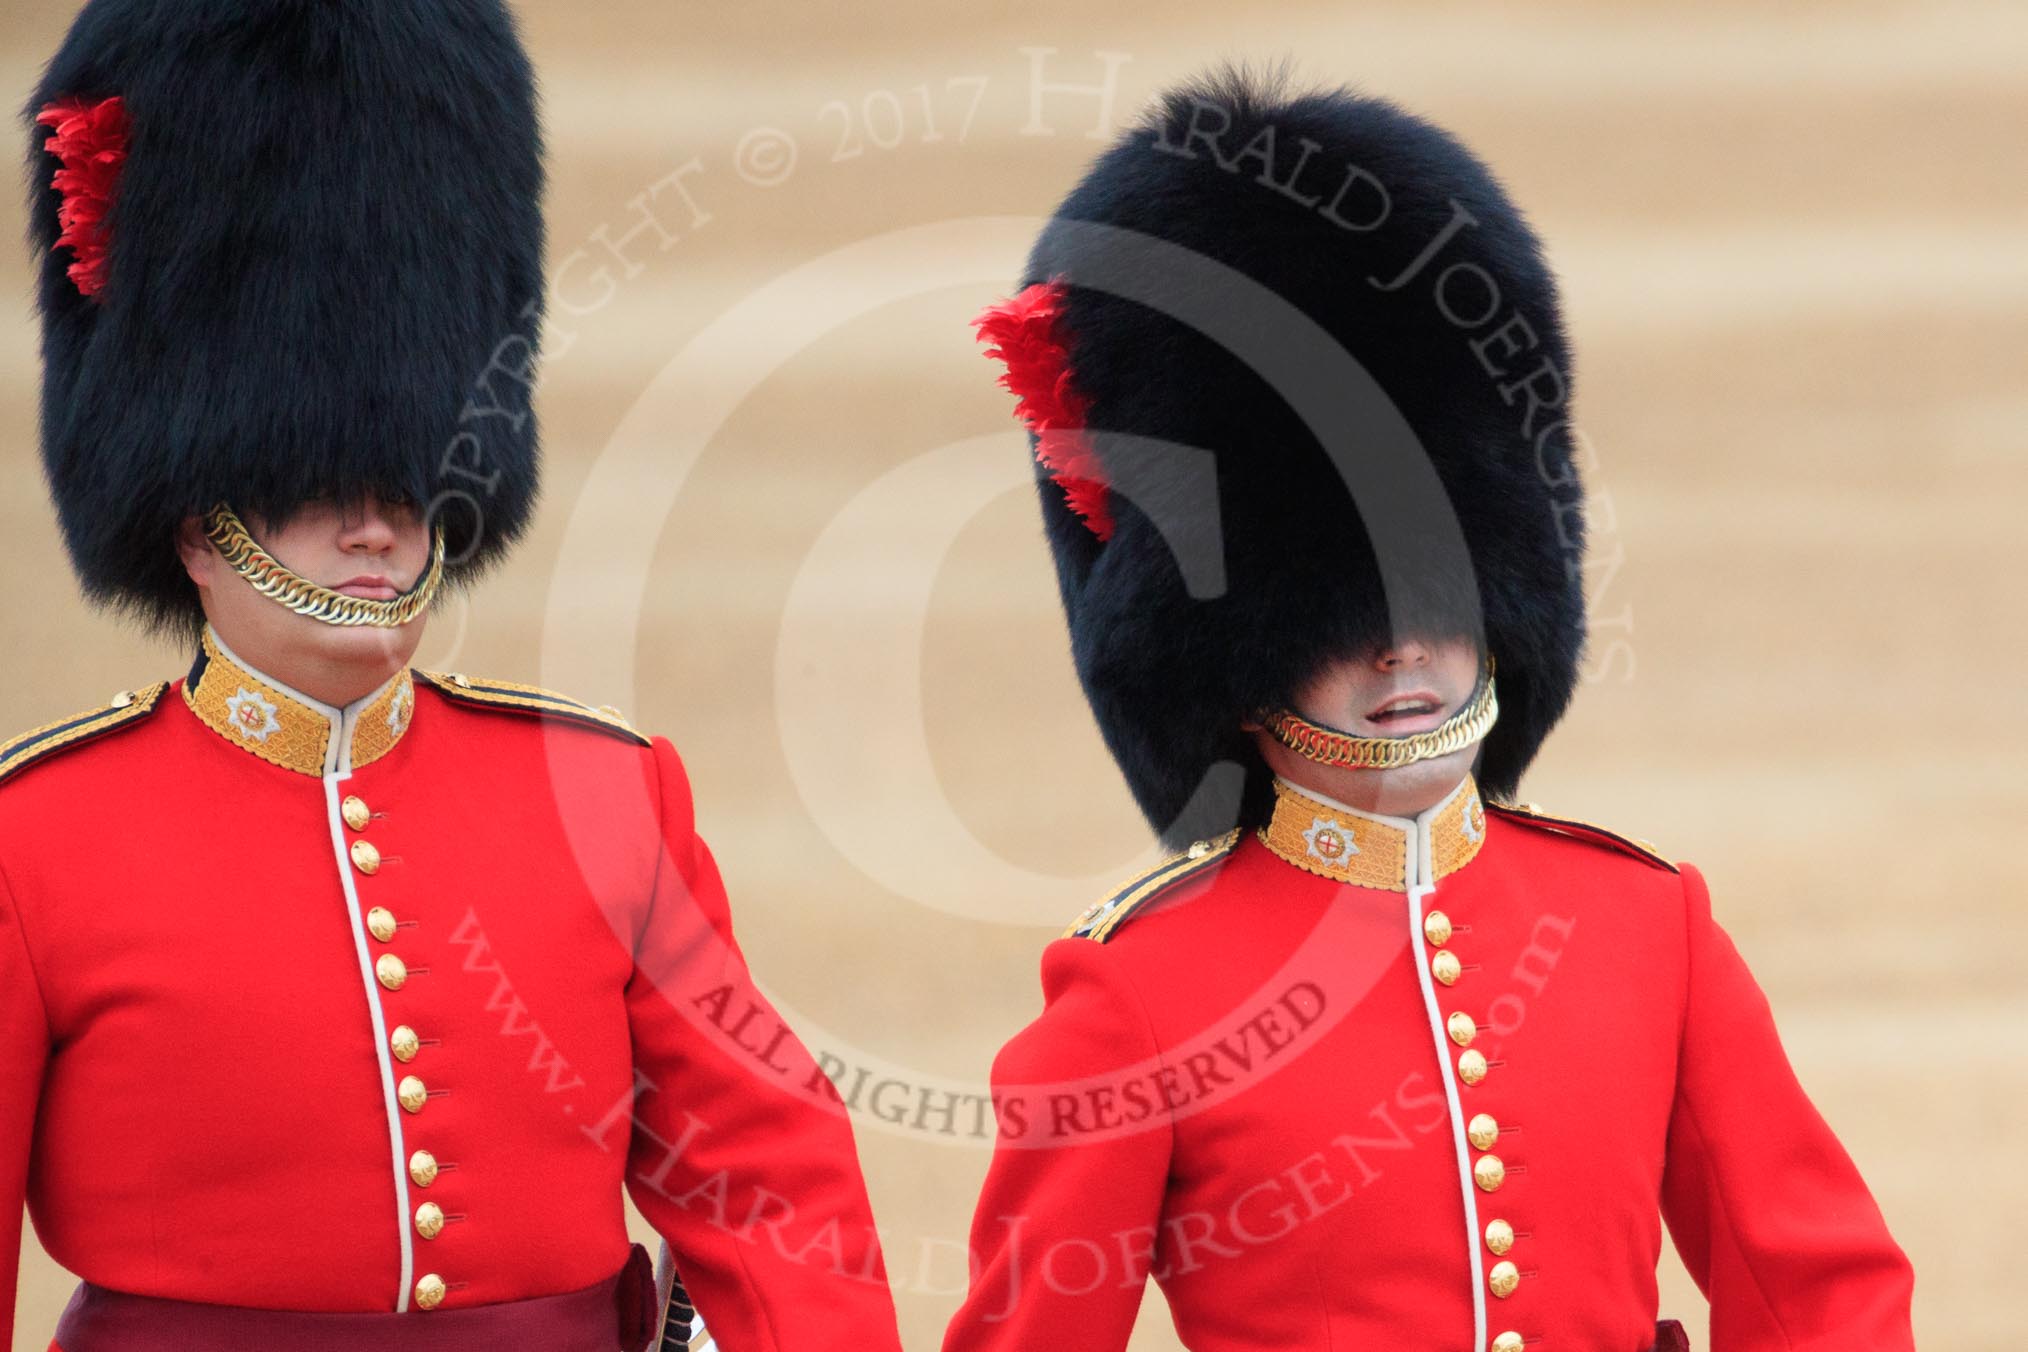 during The Colonel's Review {iptcyear4} (final rehearsal for Trooping the Colour, The Queen's Birthday Parade)  at Horse Guards Parade, Westminster, London, 2 June 2018, 09:54.